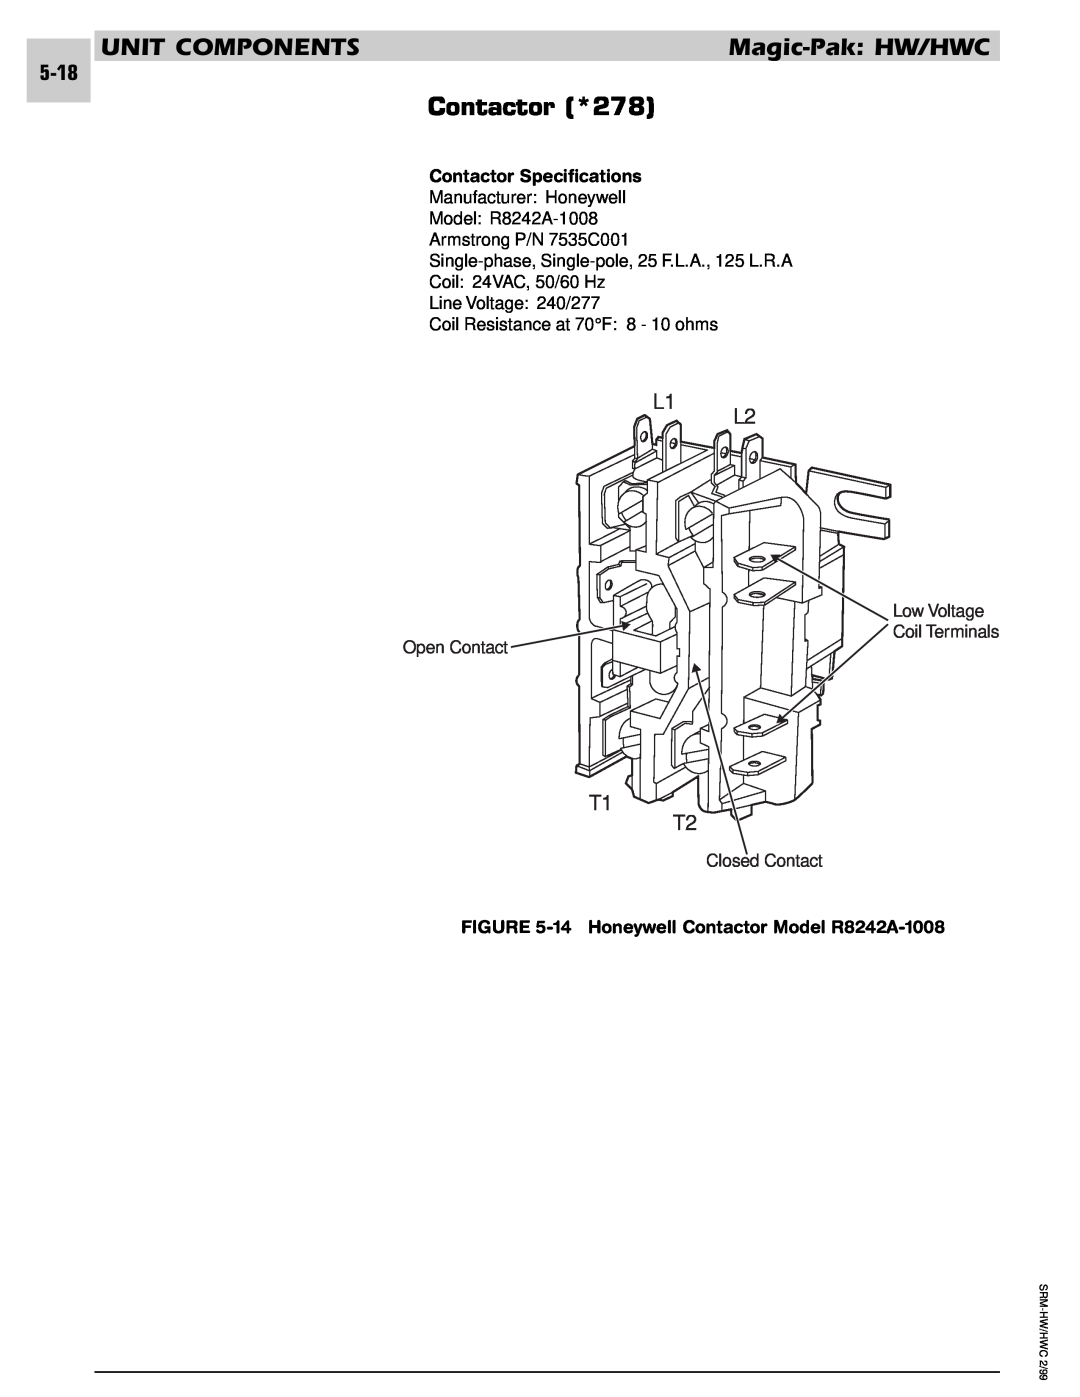 Armstrong World Industries 302, 243, 122, 123, 203, 182, 183 Contactor Specifications, 14 Honeywell Contactor Model R8242A-1008 